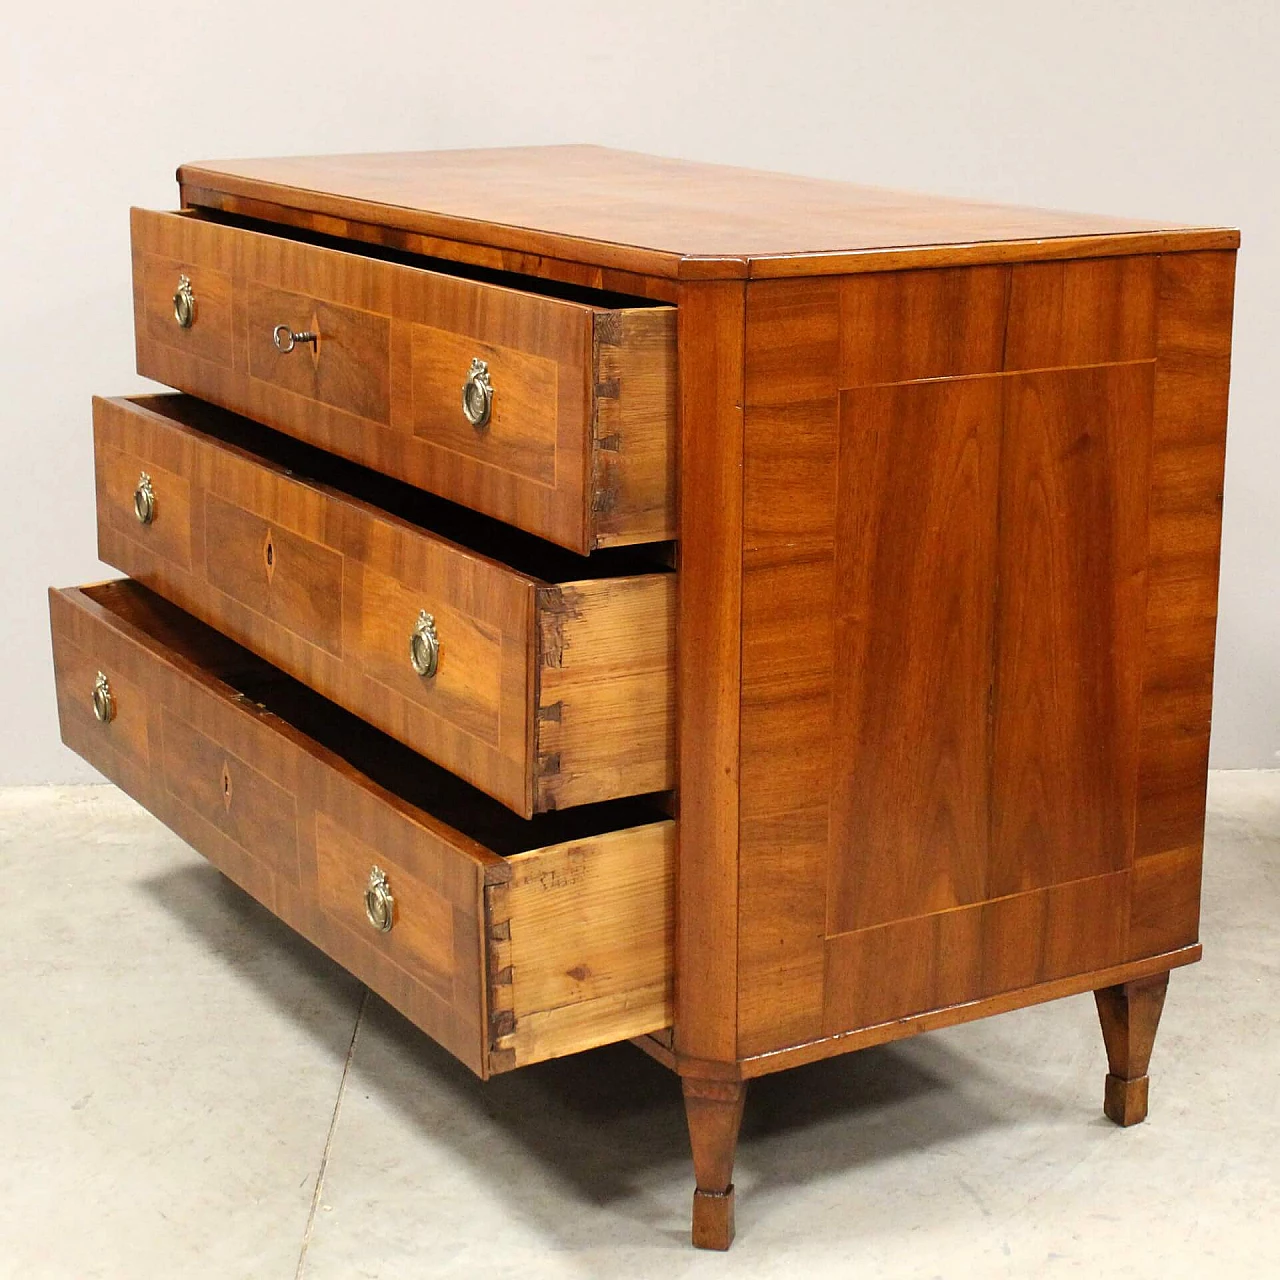 Direttorio chest of drawers in inlaid walnut, second half of the 18th century 10